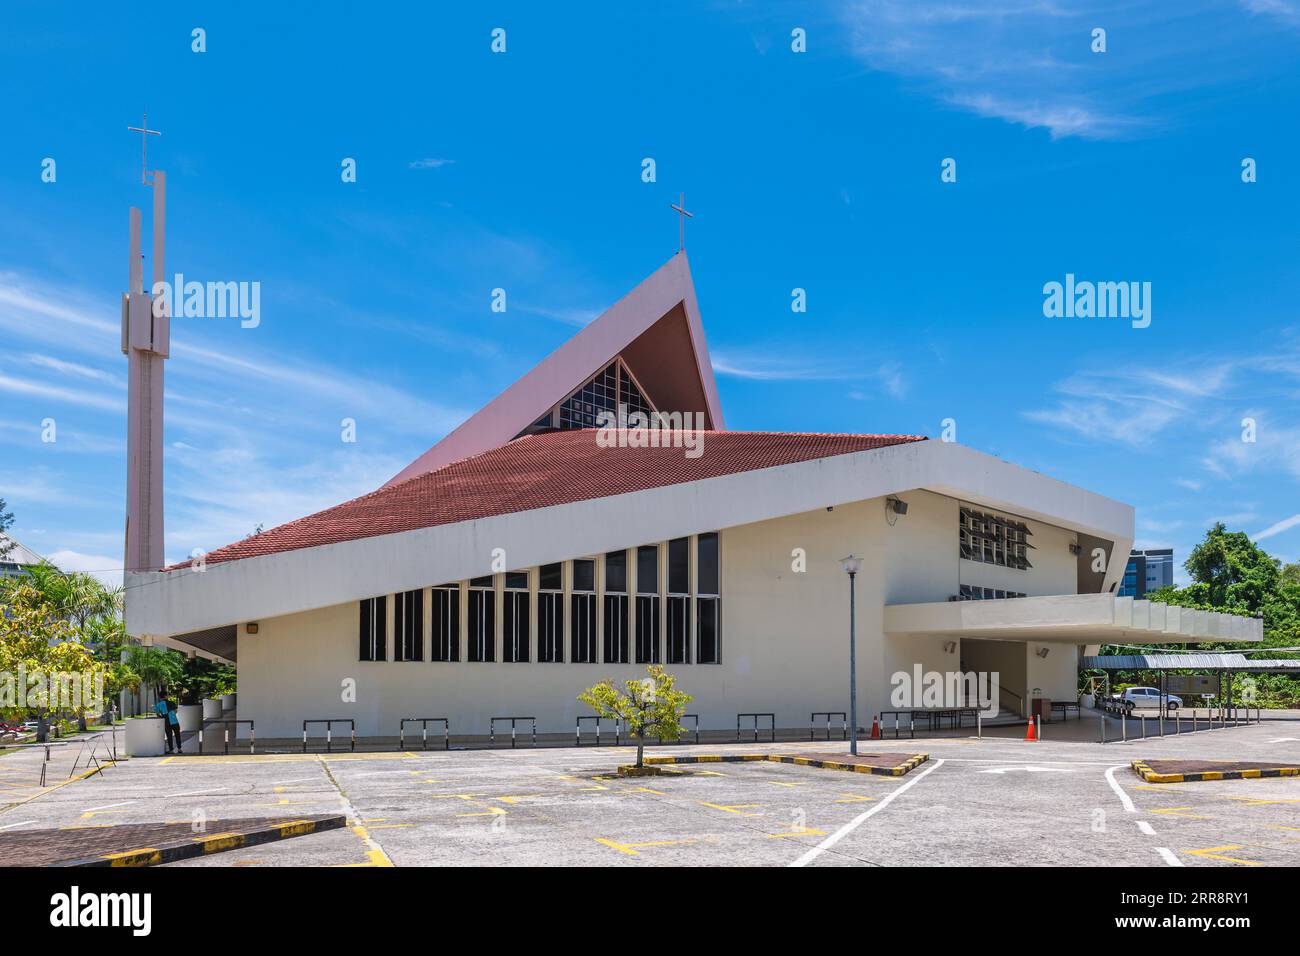 Sacred Heart Cathedral built in 1979 and located in Kota Kinabalu, Sabah, east Malaysia Stock Photo